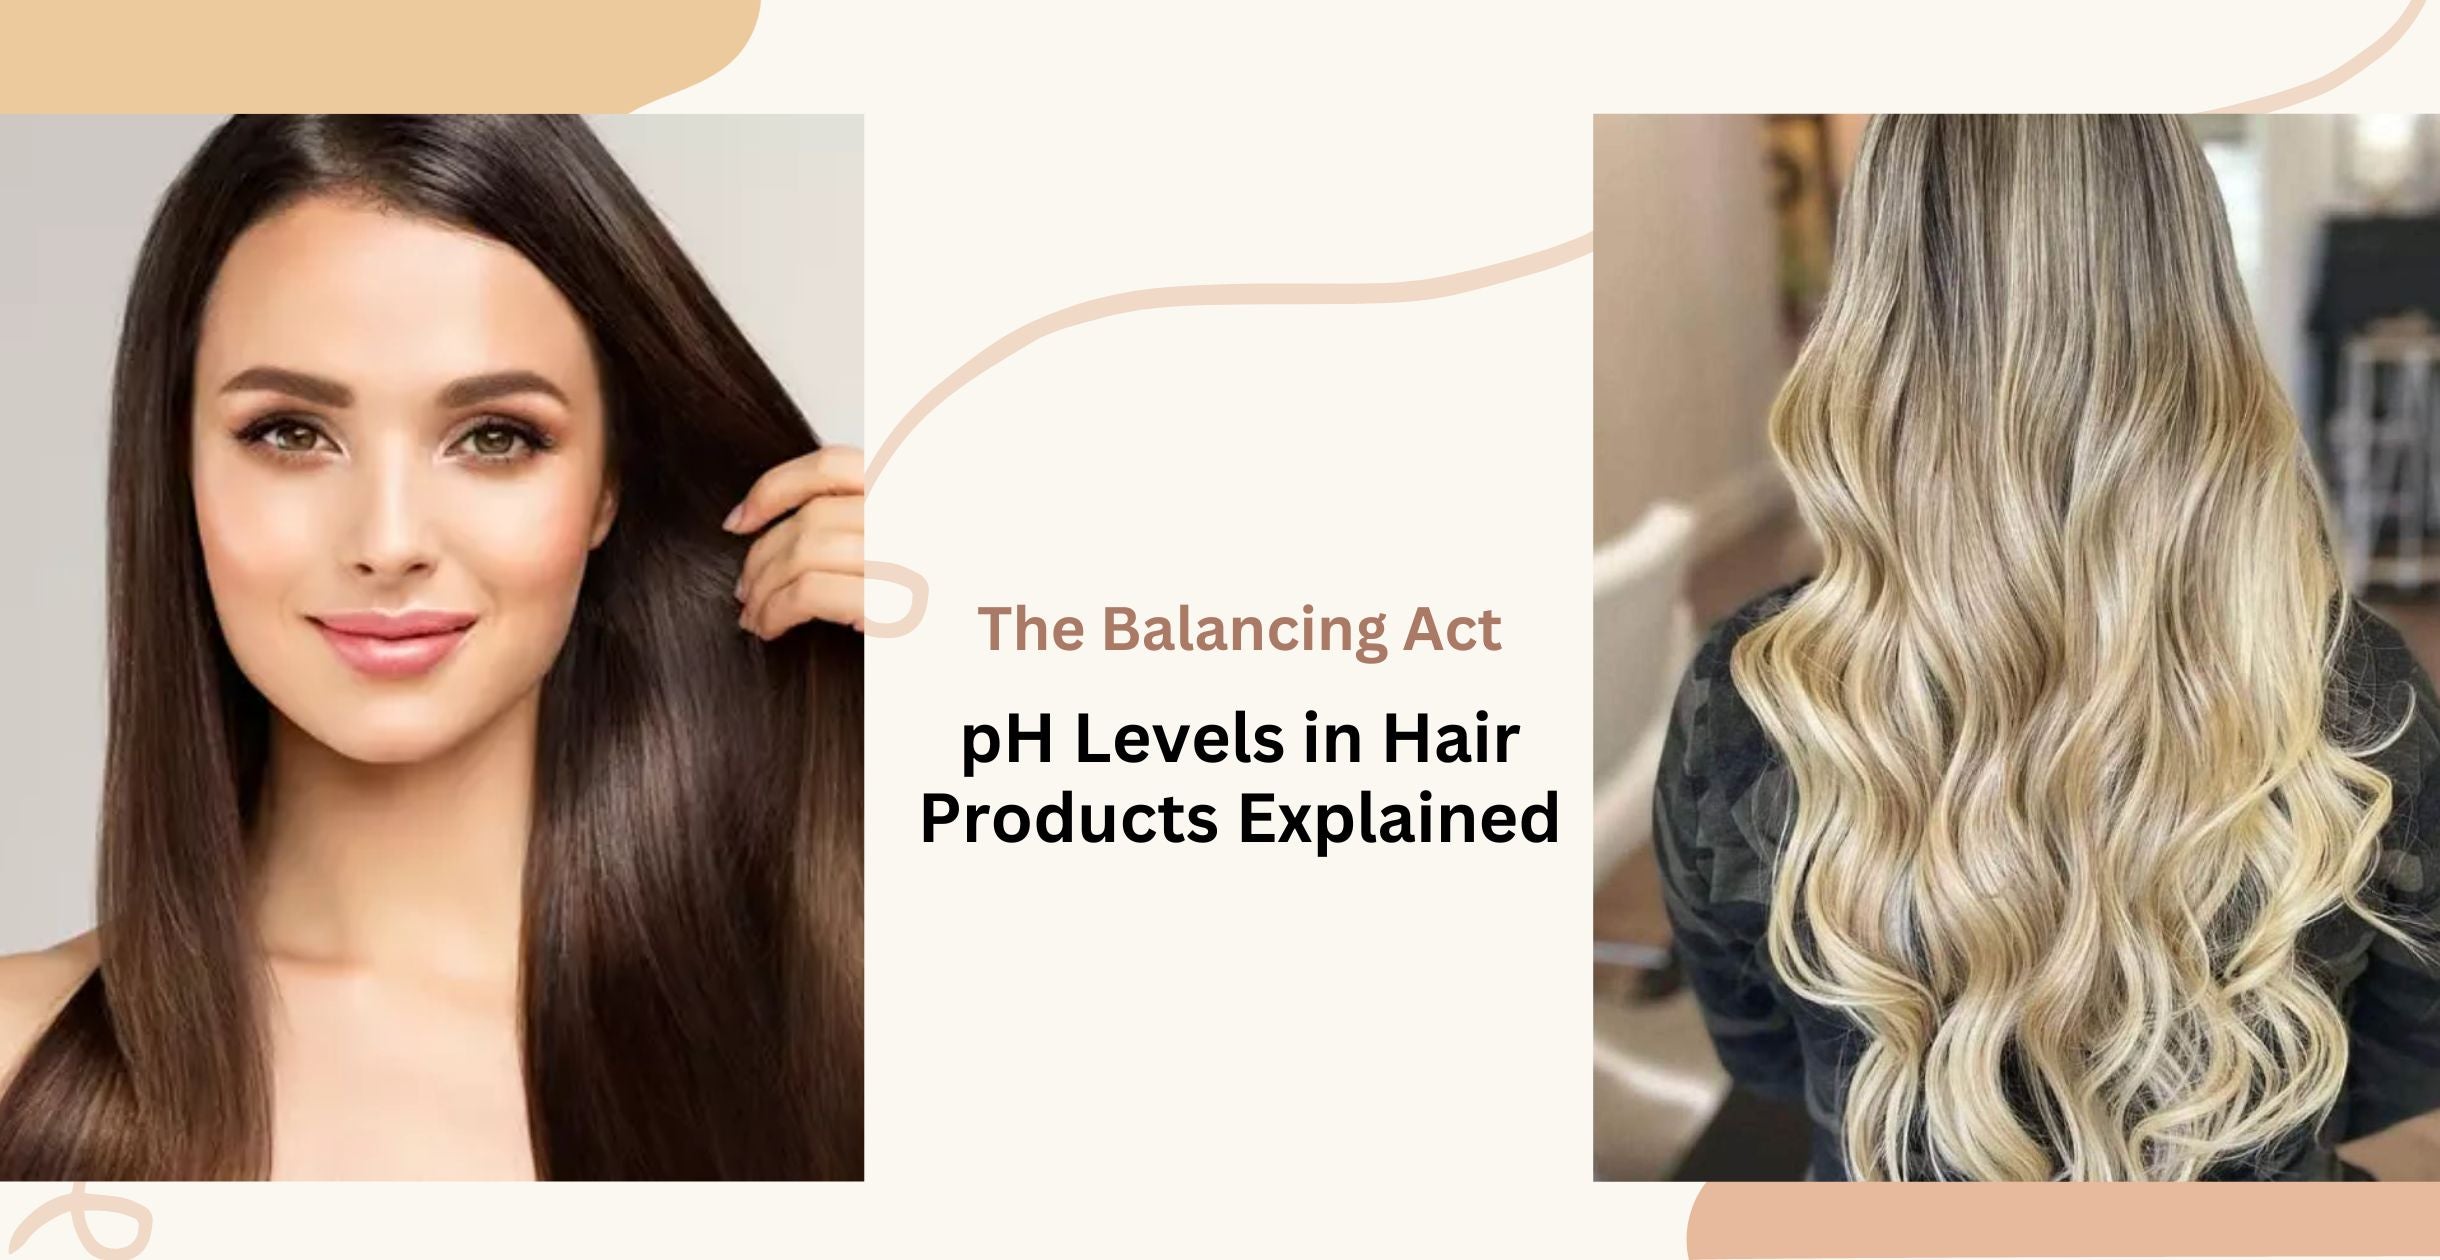 The Balancing Act: pH Levels in Hair Products Explained